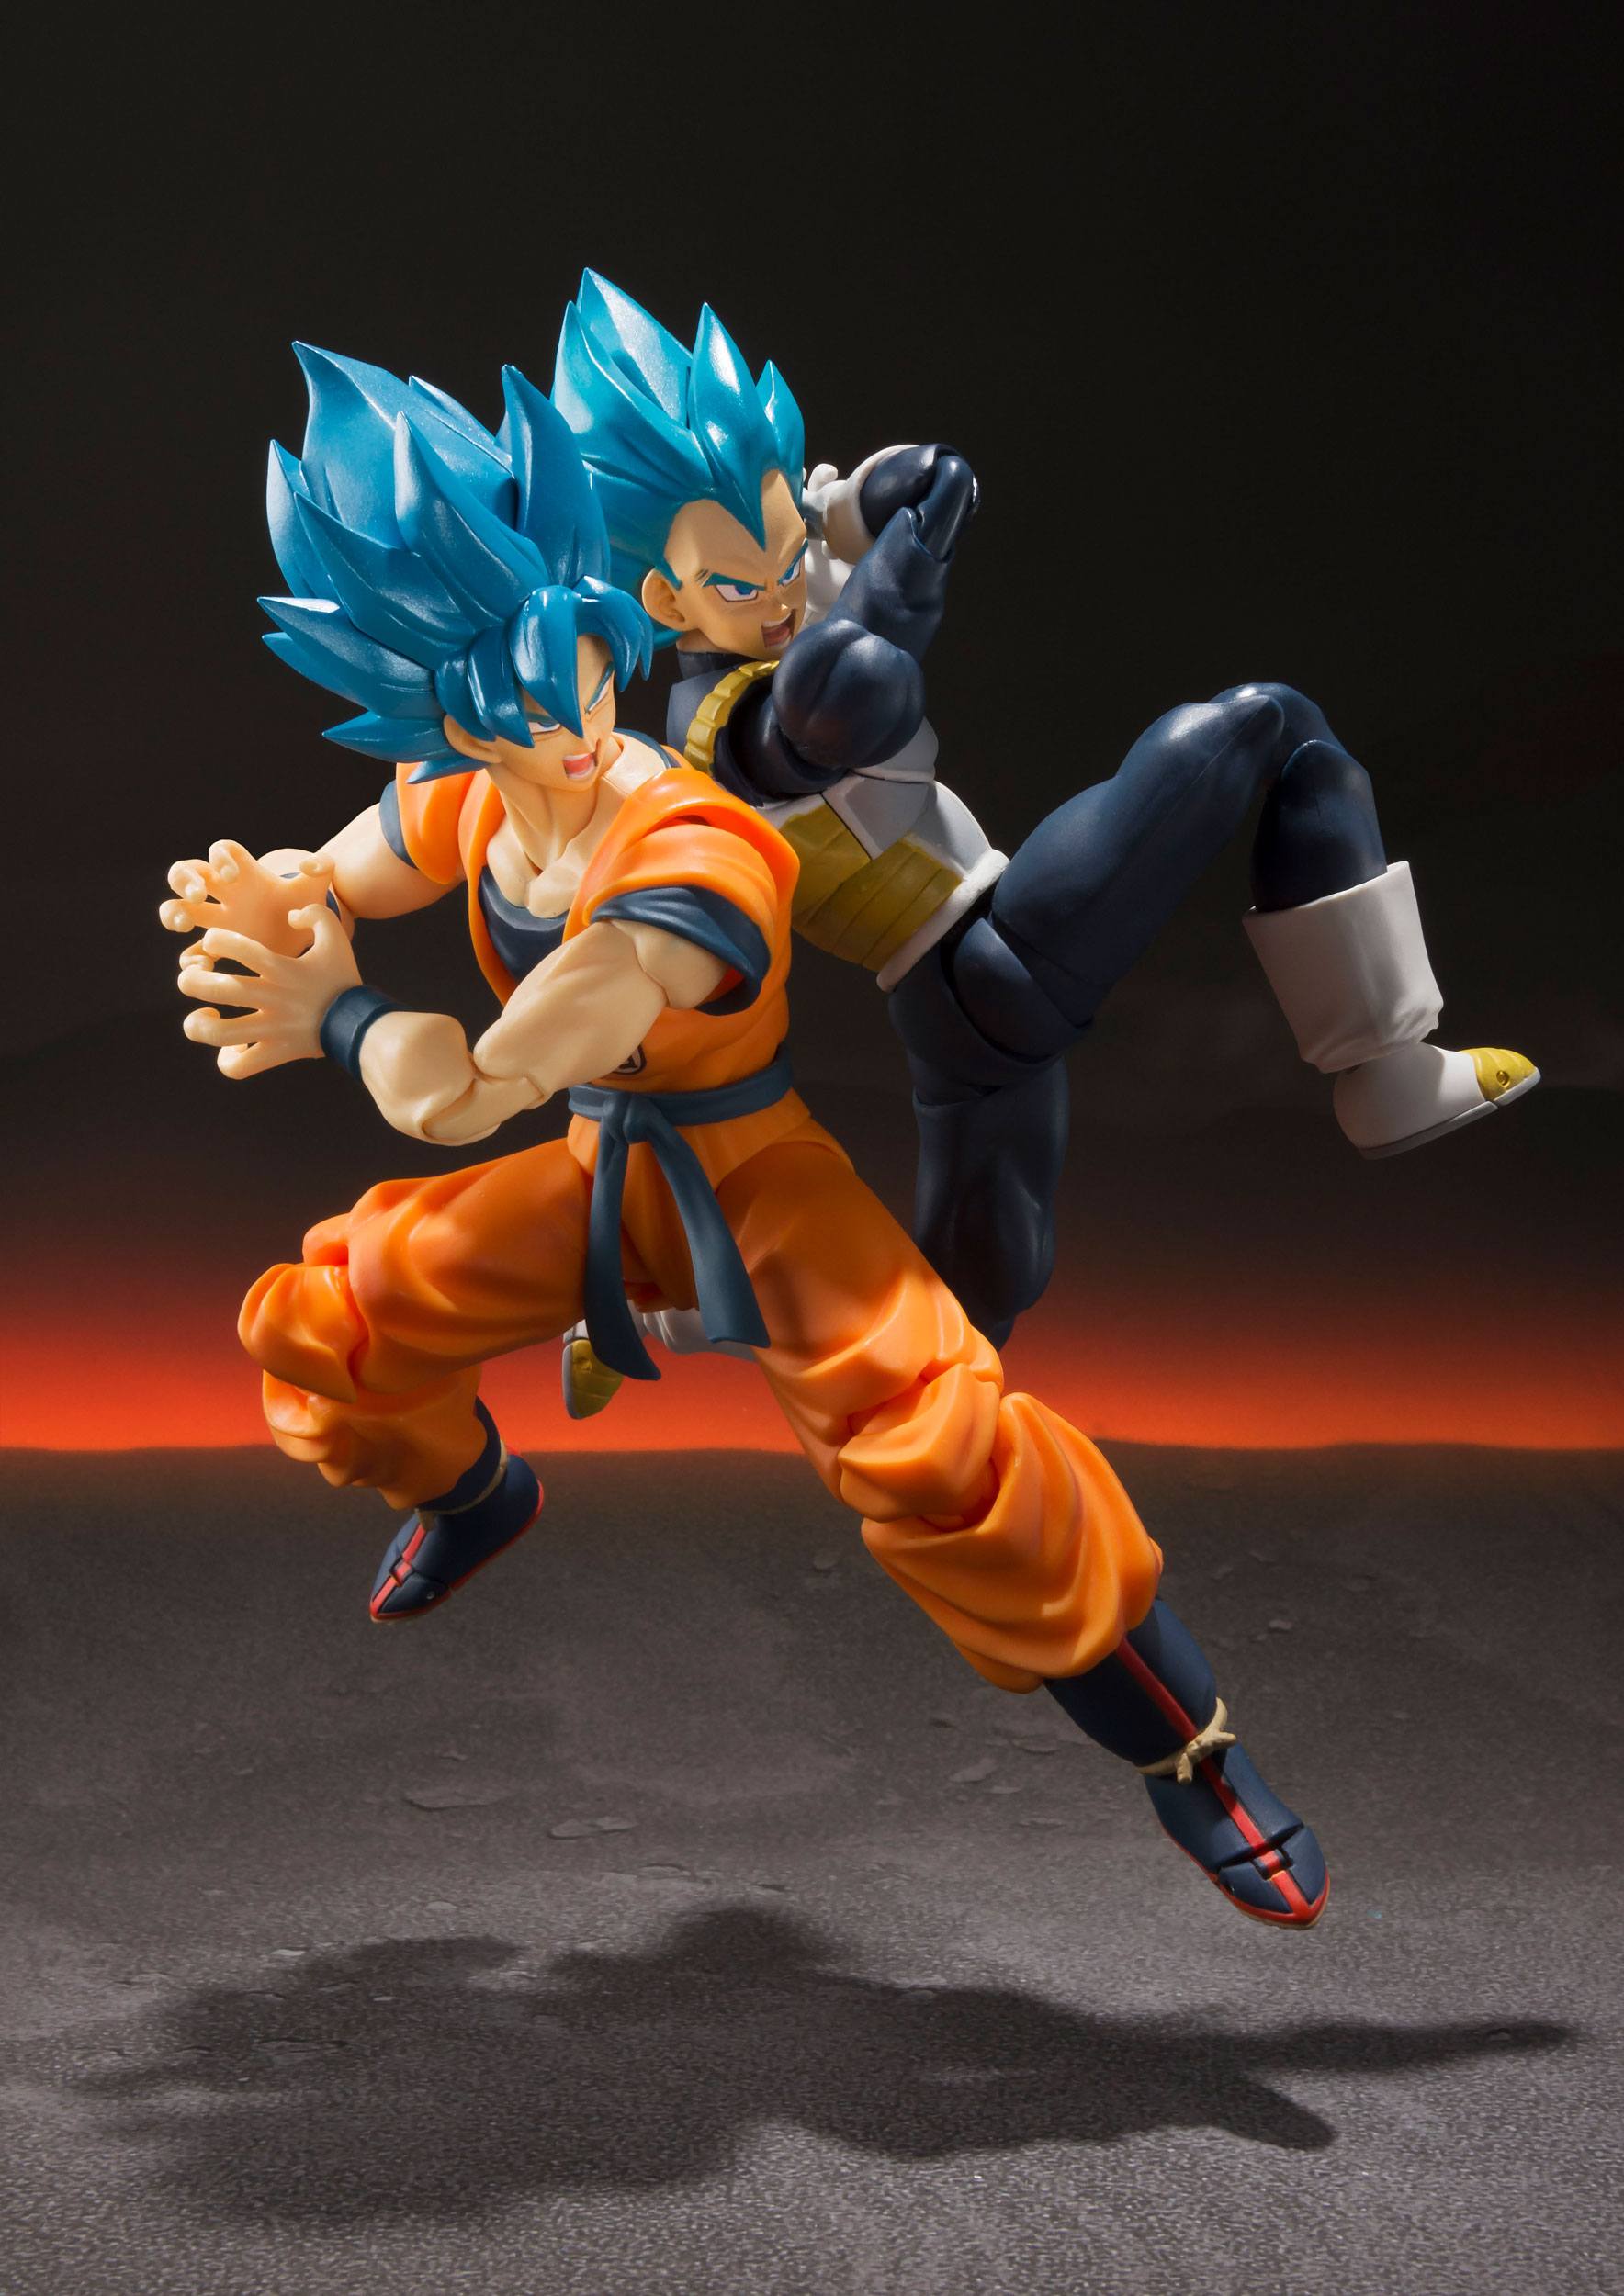 Dragon Ball Super Broly S.H. Figuarts Action Figure Super Saiyan God Super Saiyan Goku Super 14 cm